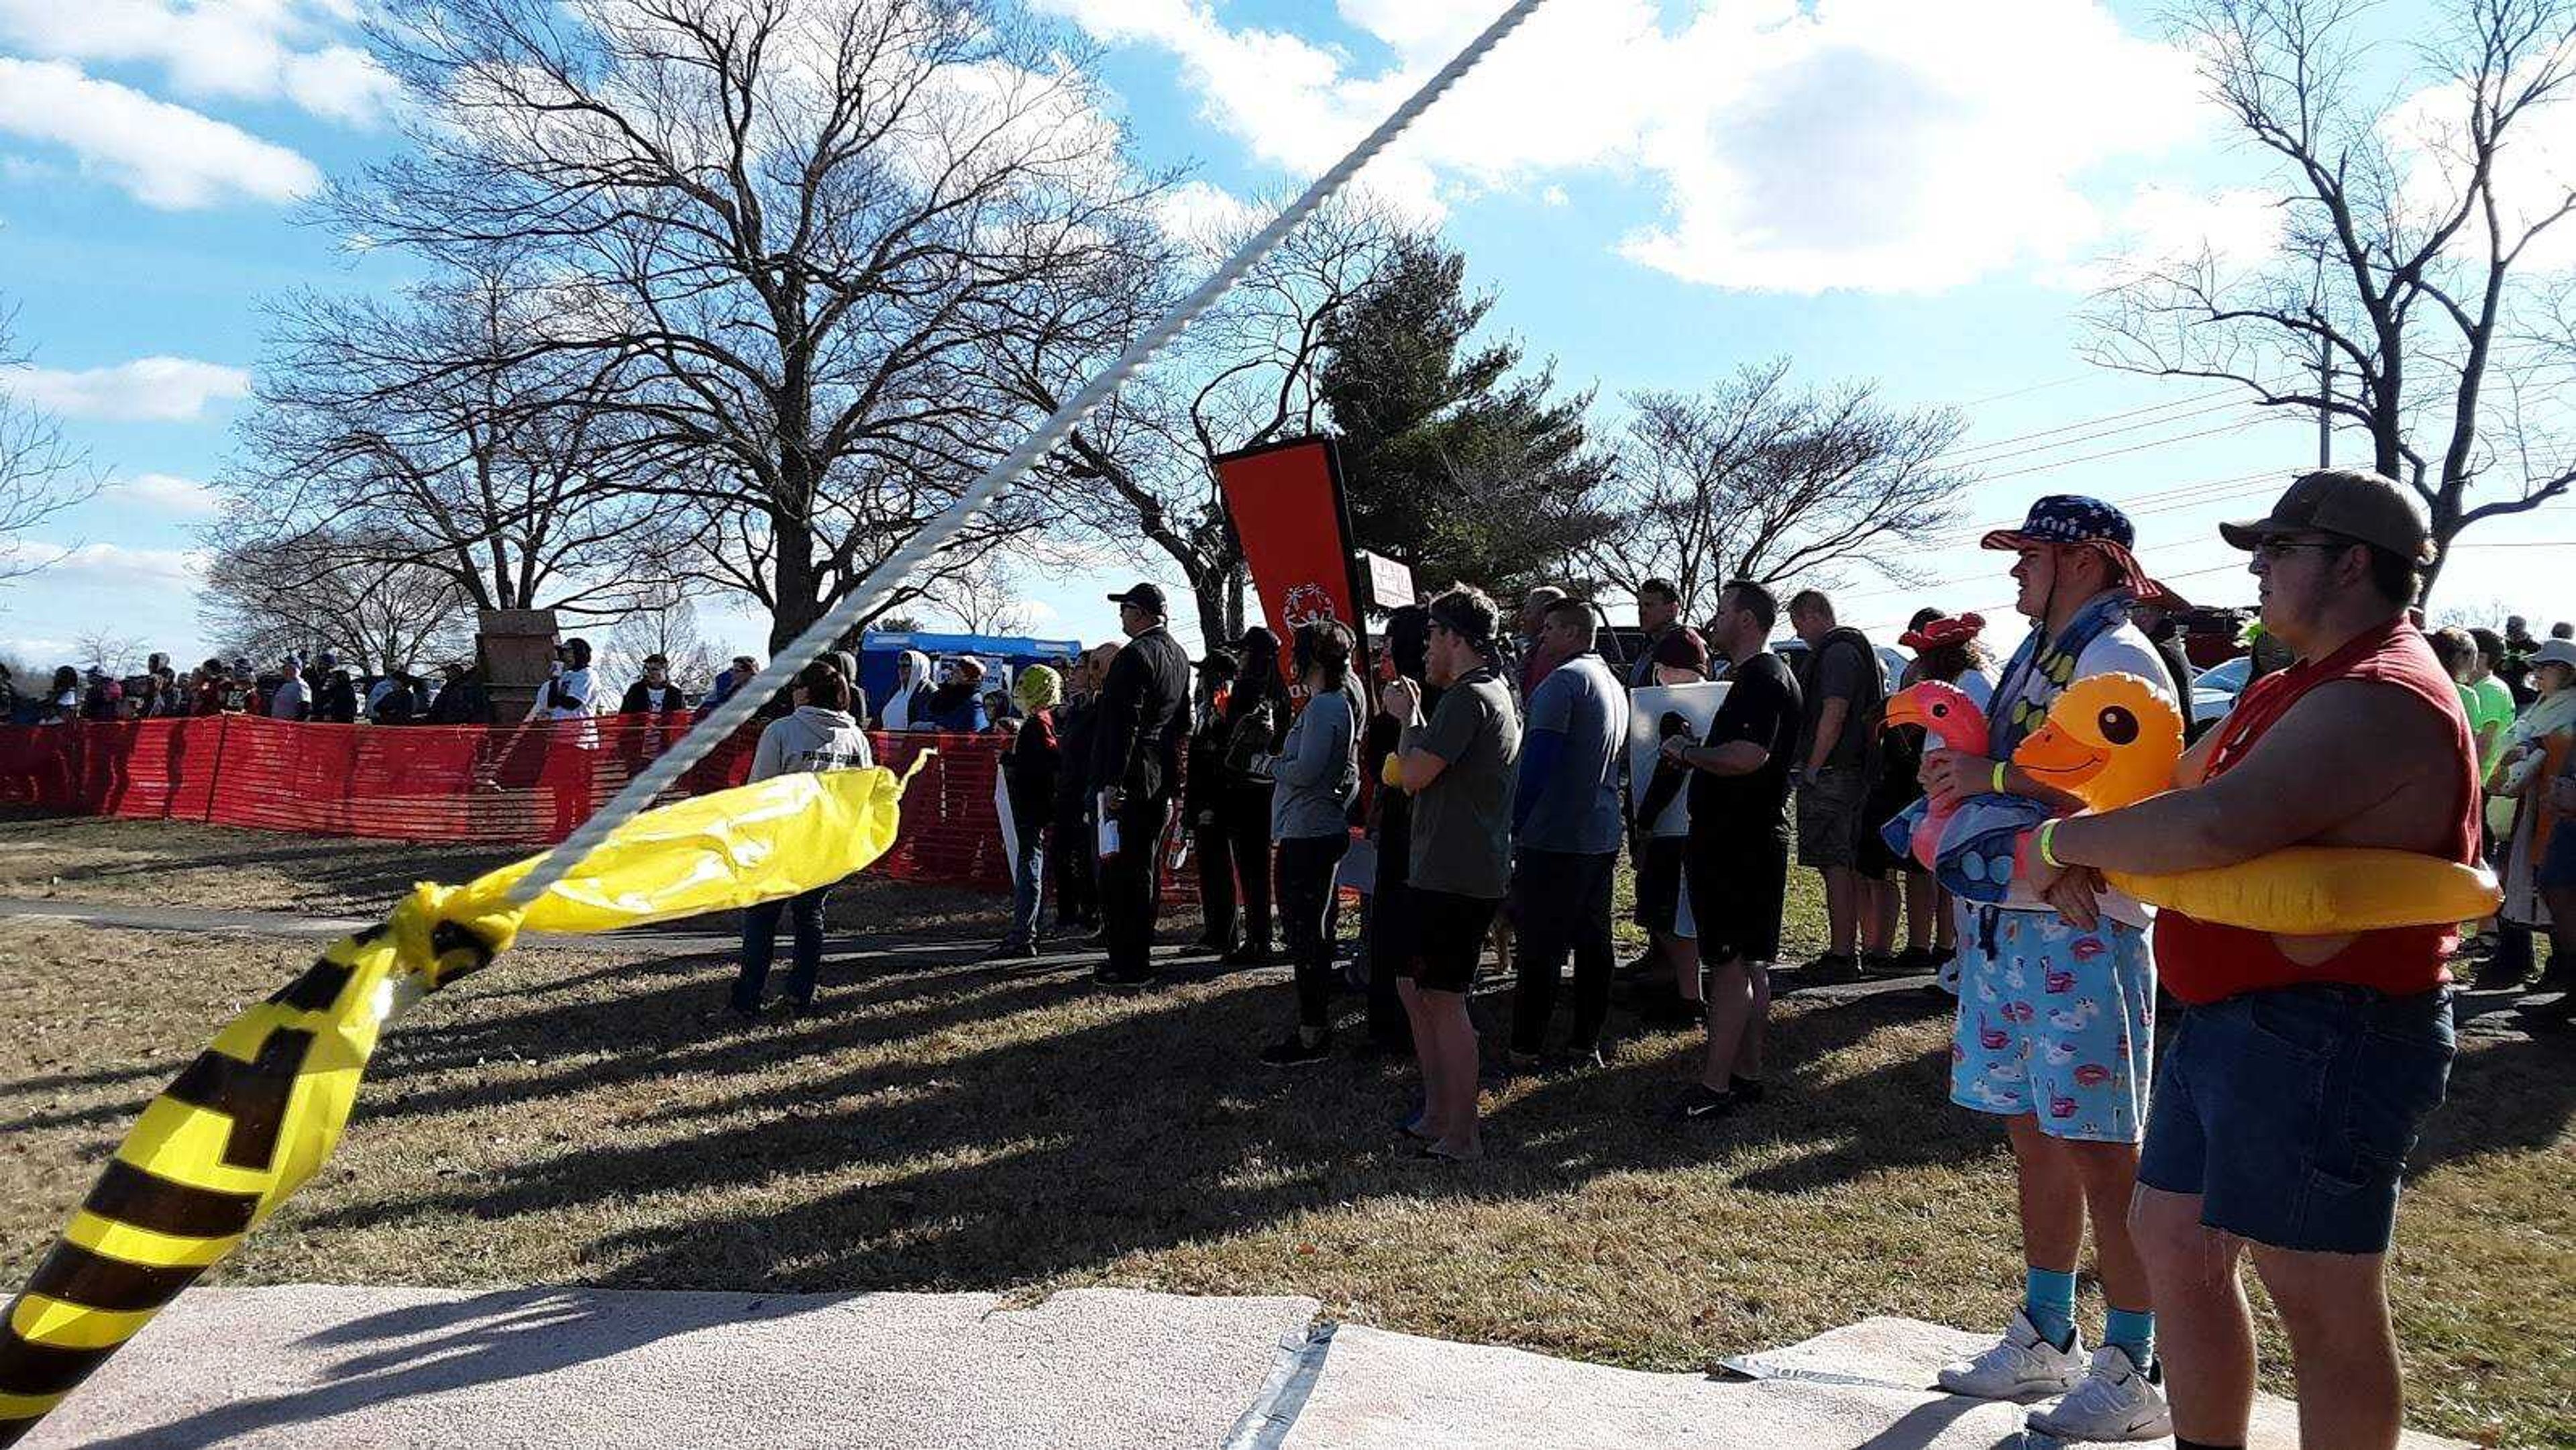 "Plungers" gather in line, assigned by heat number, to head into the waters for Special Olympics at the Cape Girardeau County Park North lake on Feb. 1.